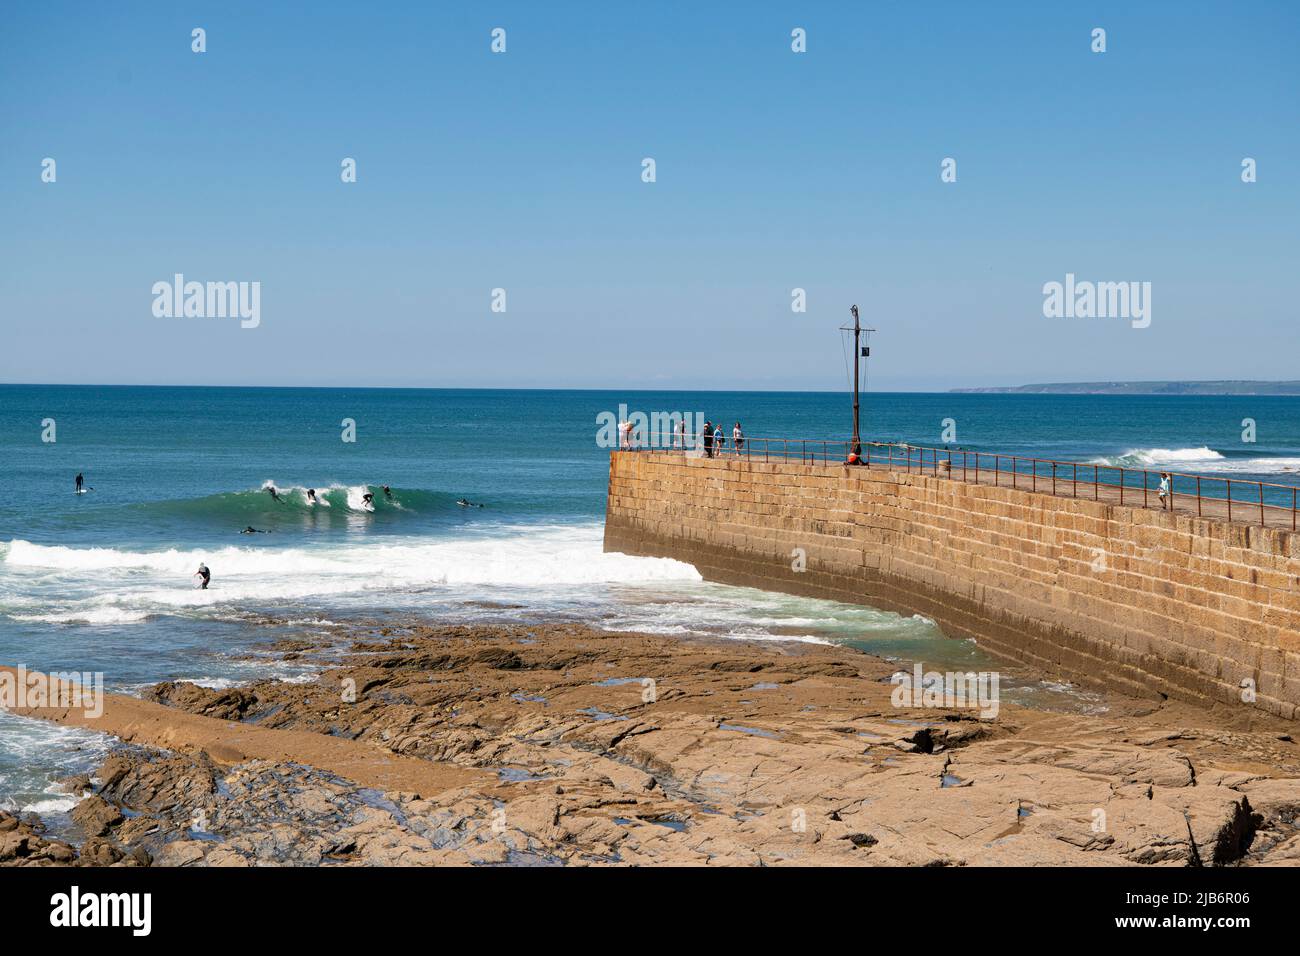 Surfers paradise, very sunny warm with large waves Porthleven Cornwall paddle boards and swimmers 03-06-22 Credit: kathleen white/Alamy Live News Stock Photo